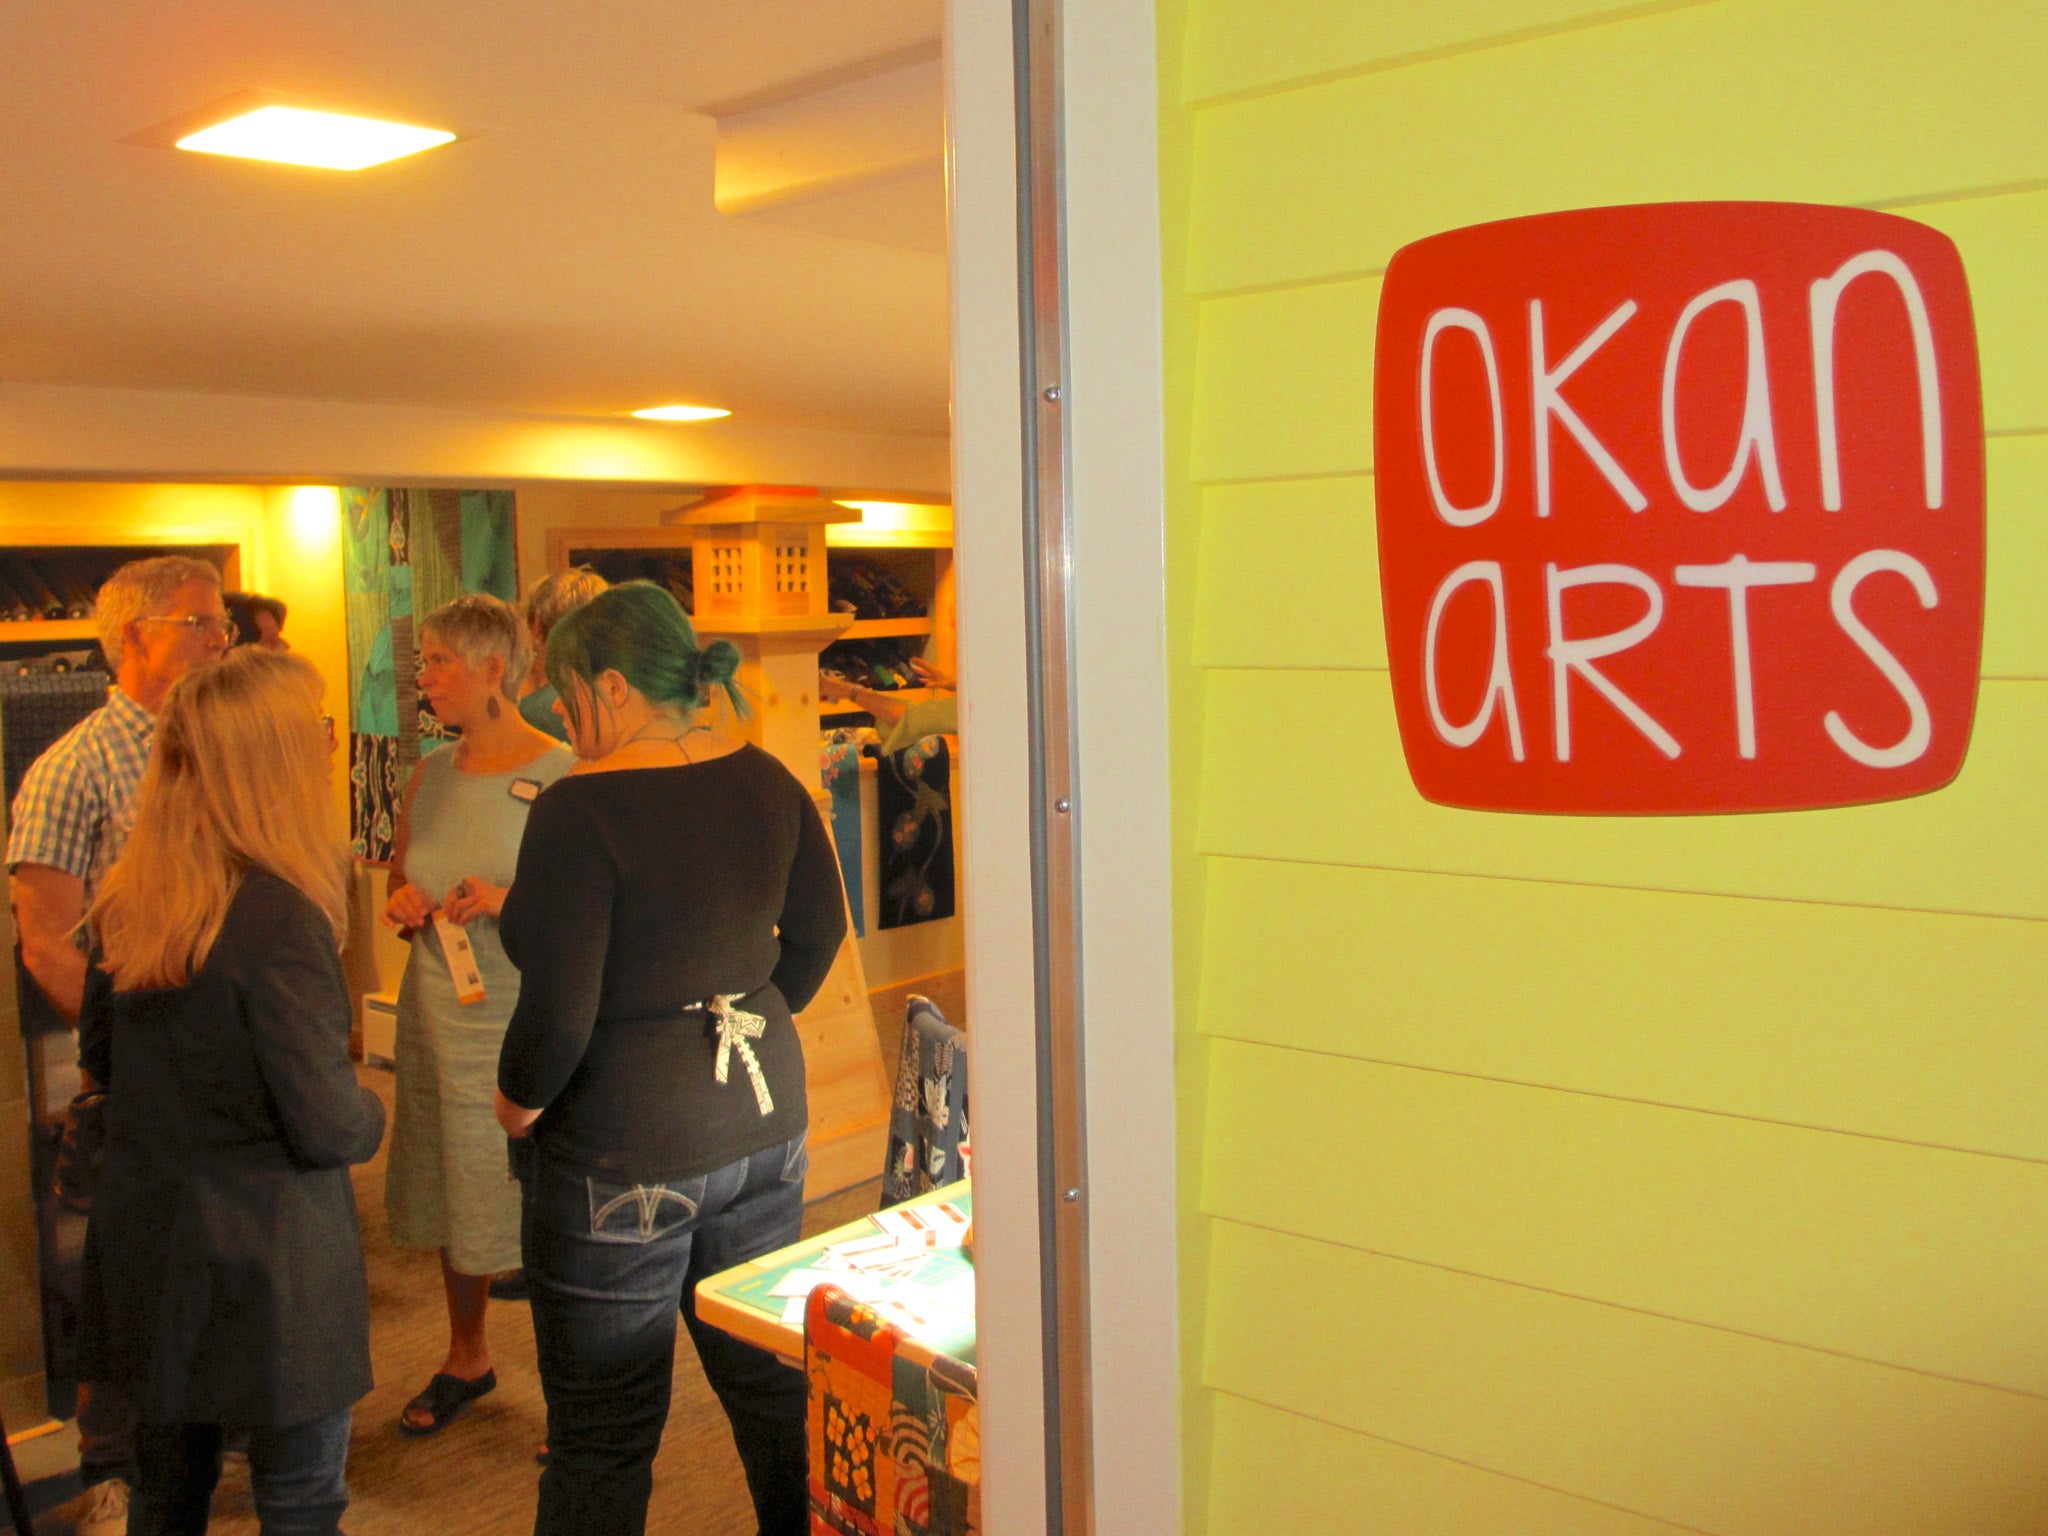 Harvest Moon Party to celebrate the opening of the Okan Arts Shop, SEPT 2013